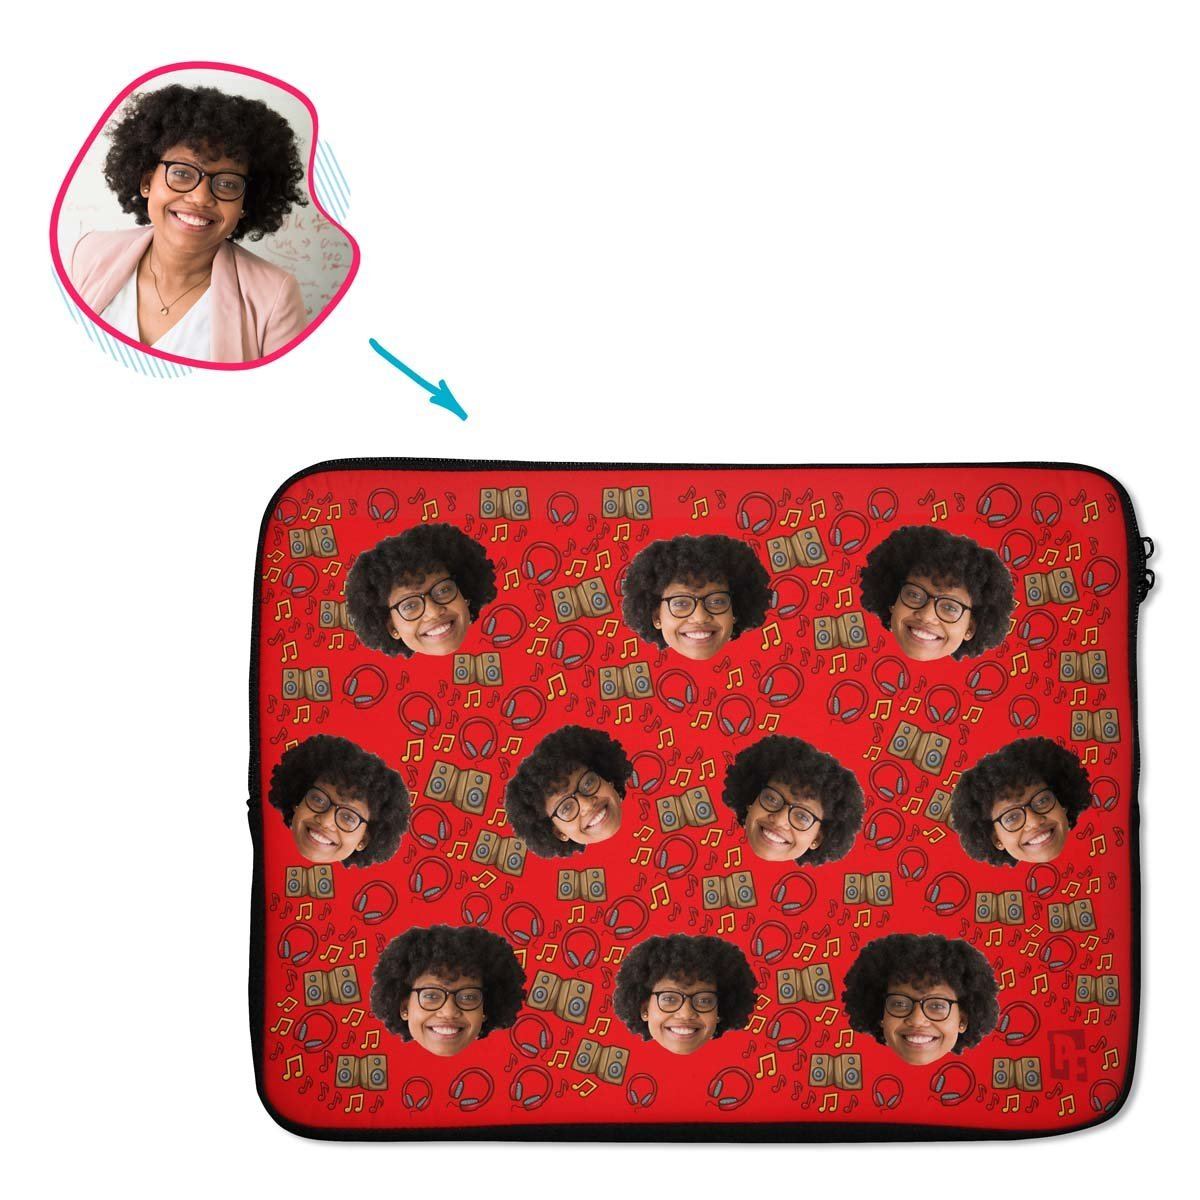 red Music laptop sleeve personalized with photo of face printed on them